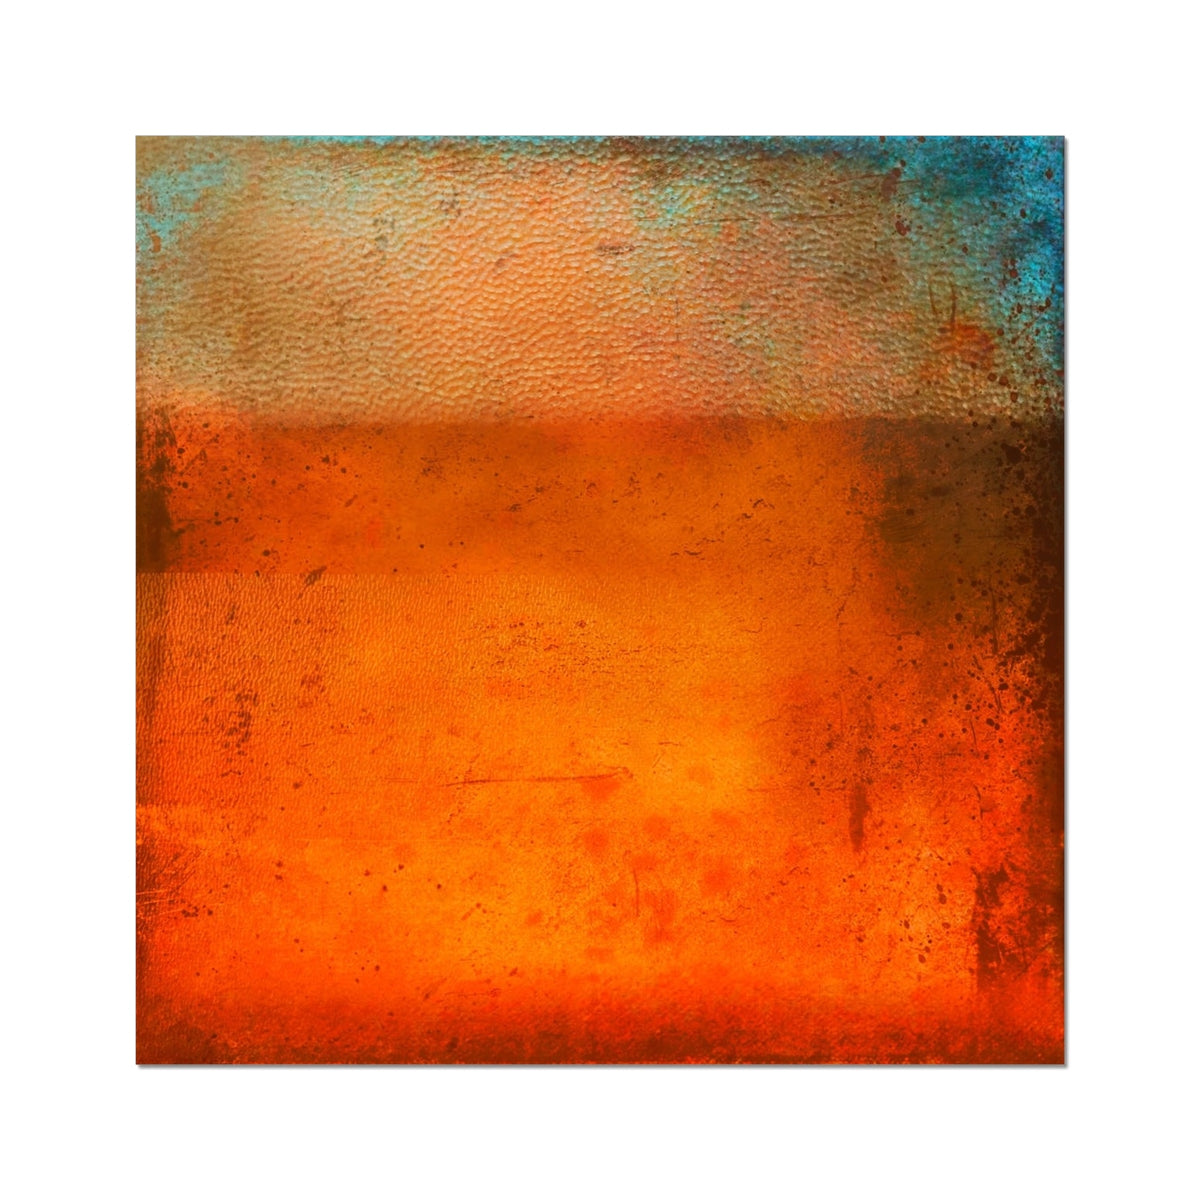 Sunset Horizon Abstract Painting | Fine Art Prints From Scotland-Unframed Prints-Abstract & Impressionistic Art Gallery-24"x24"-Paintings, Prints, Homeware, Art Gifts From Scotland By Scottish Artist Kevin Hunter